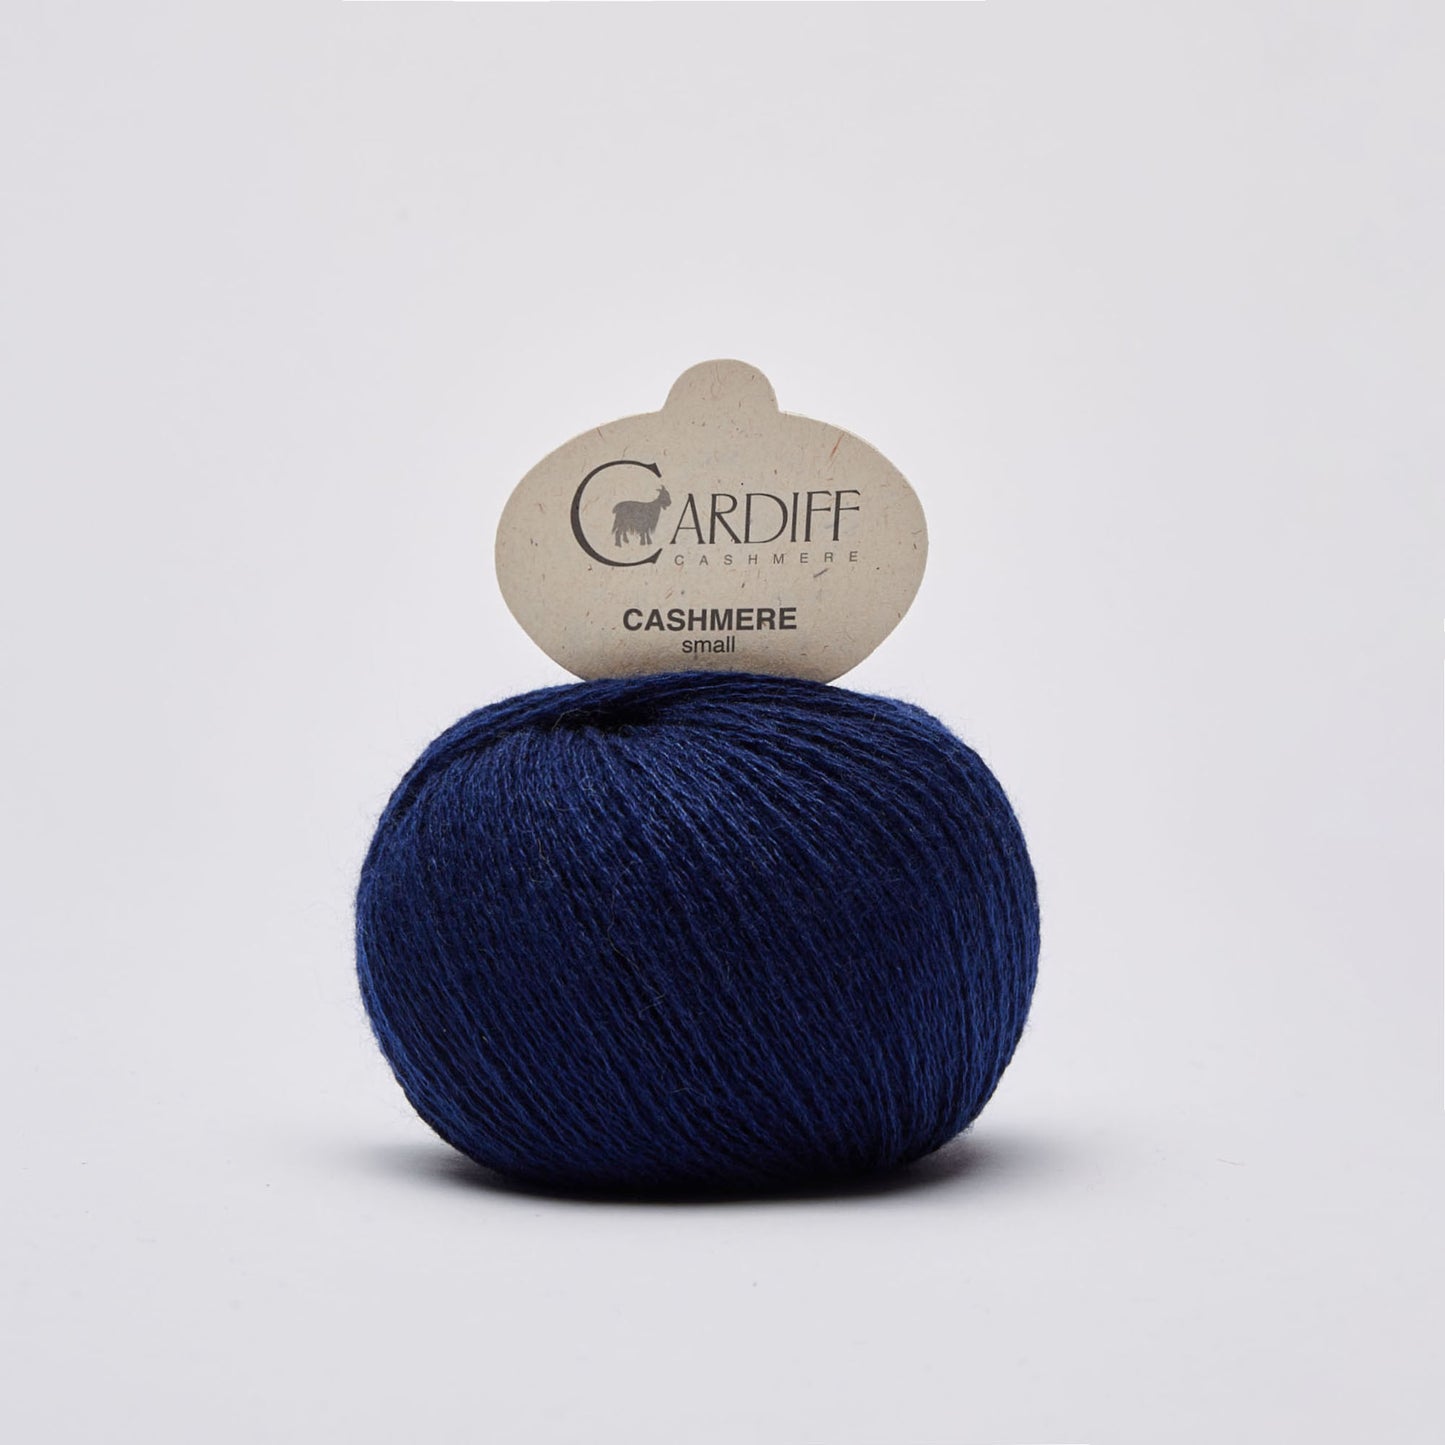 Cardiff SMALL gentle yarn, 638, INDACO, comp: 100% Cashmere